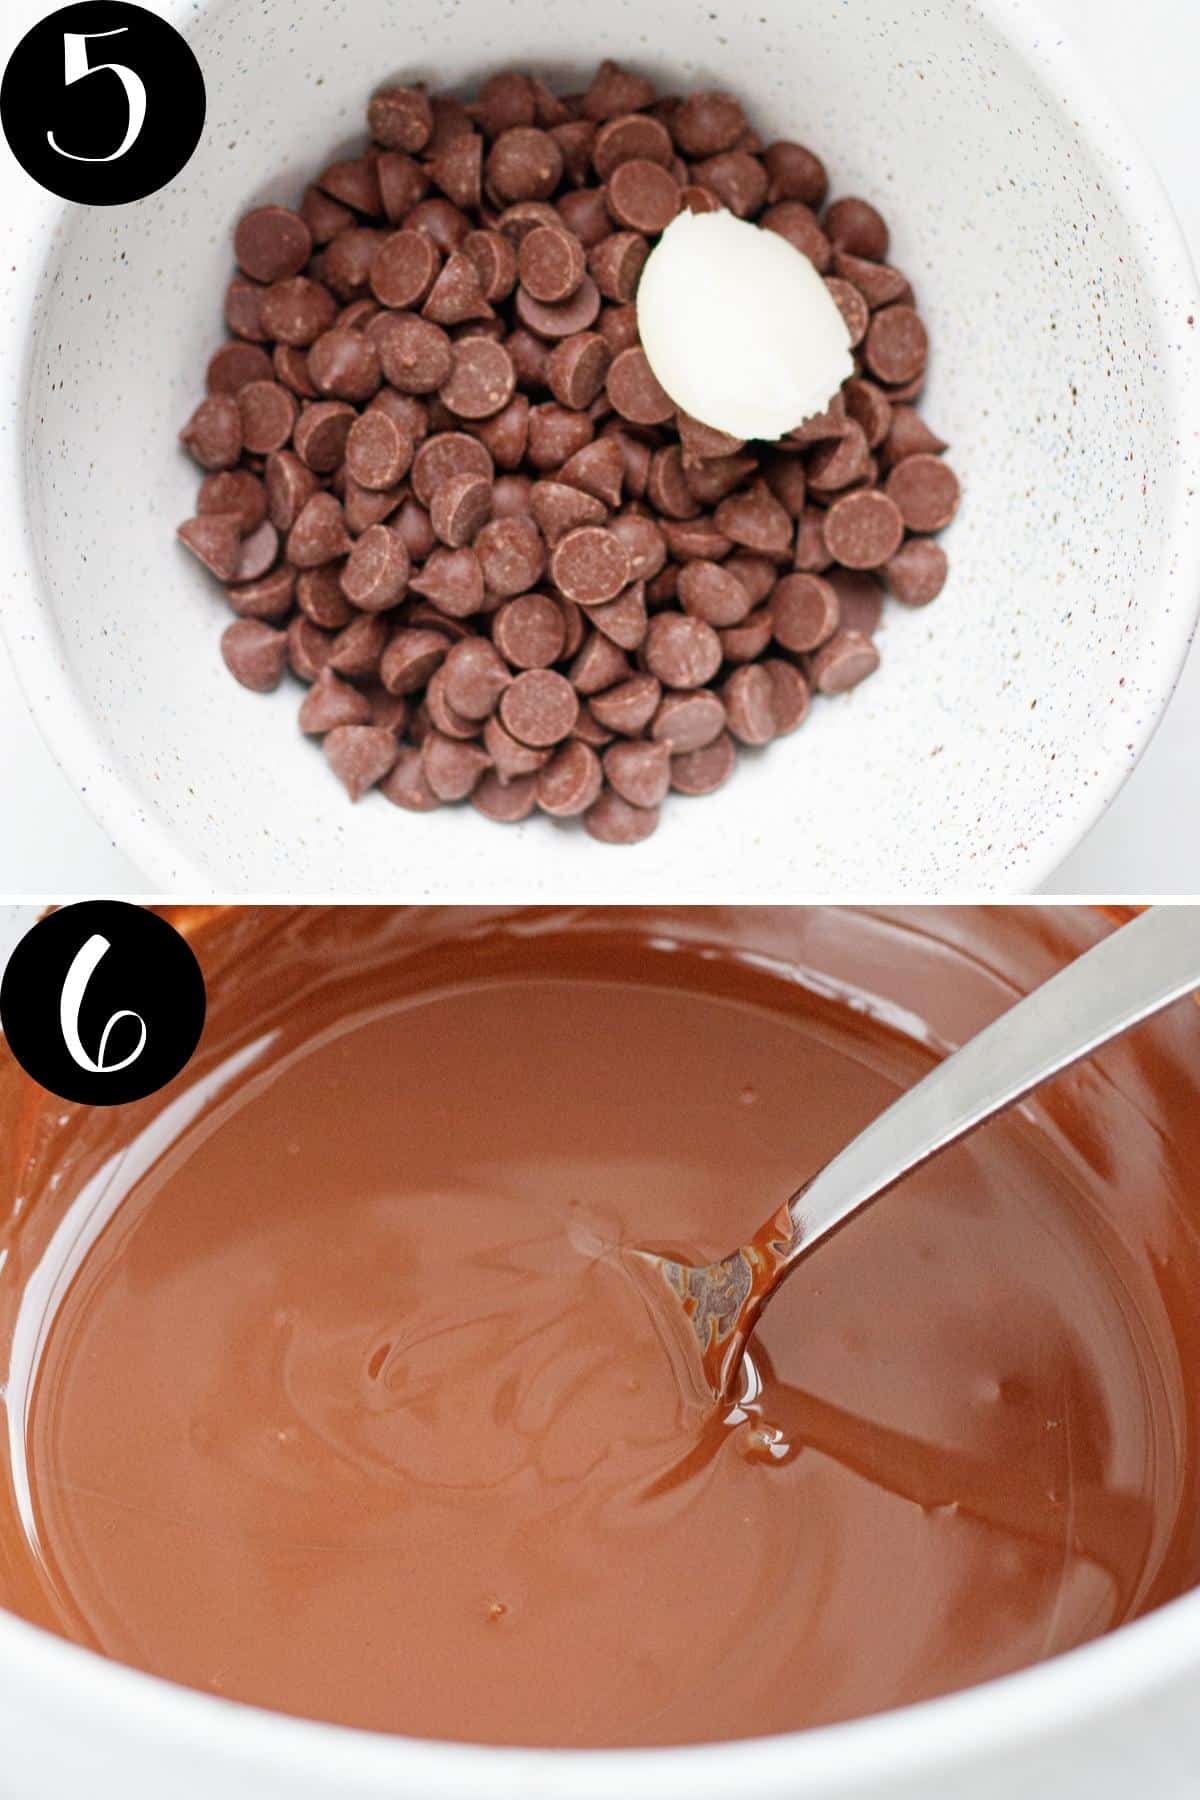 Two images of a before and after of melting chocolate.